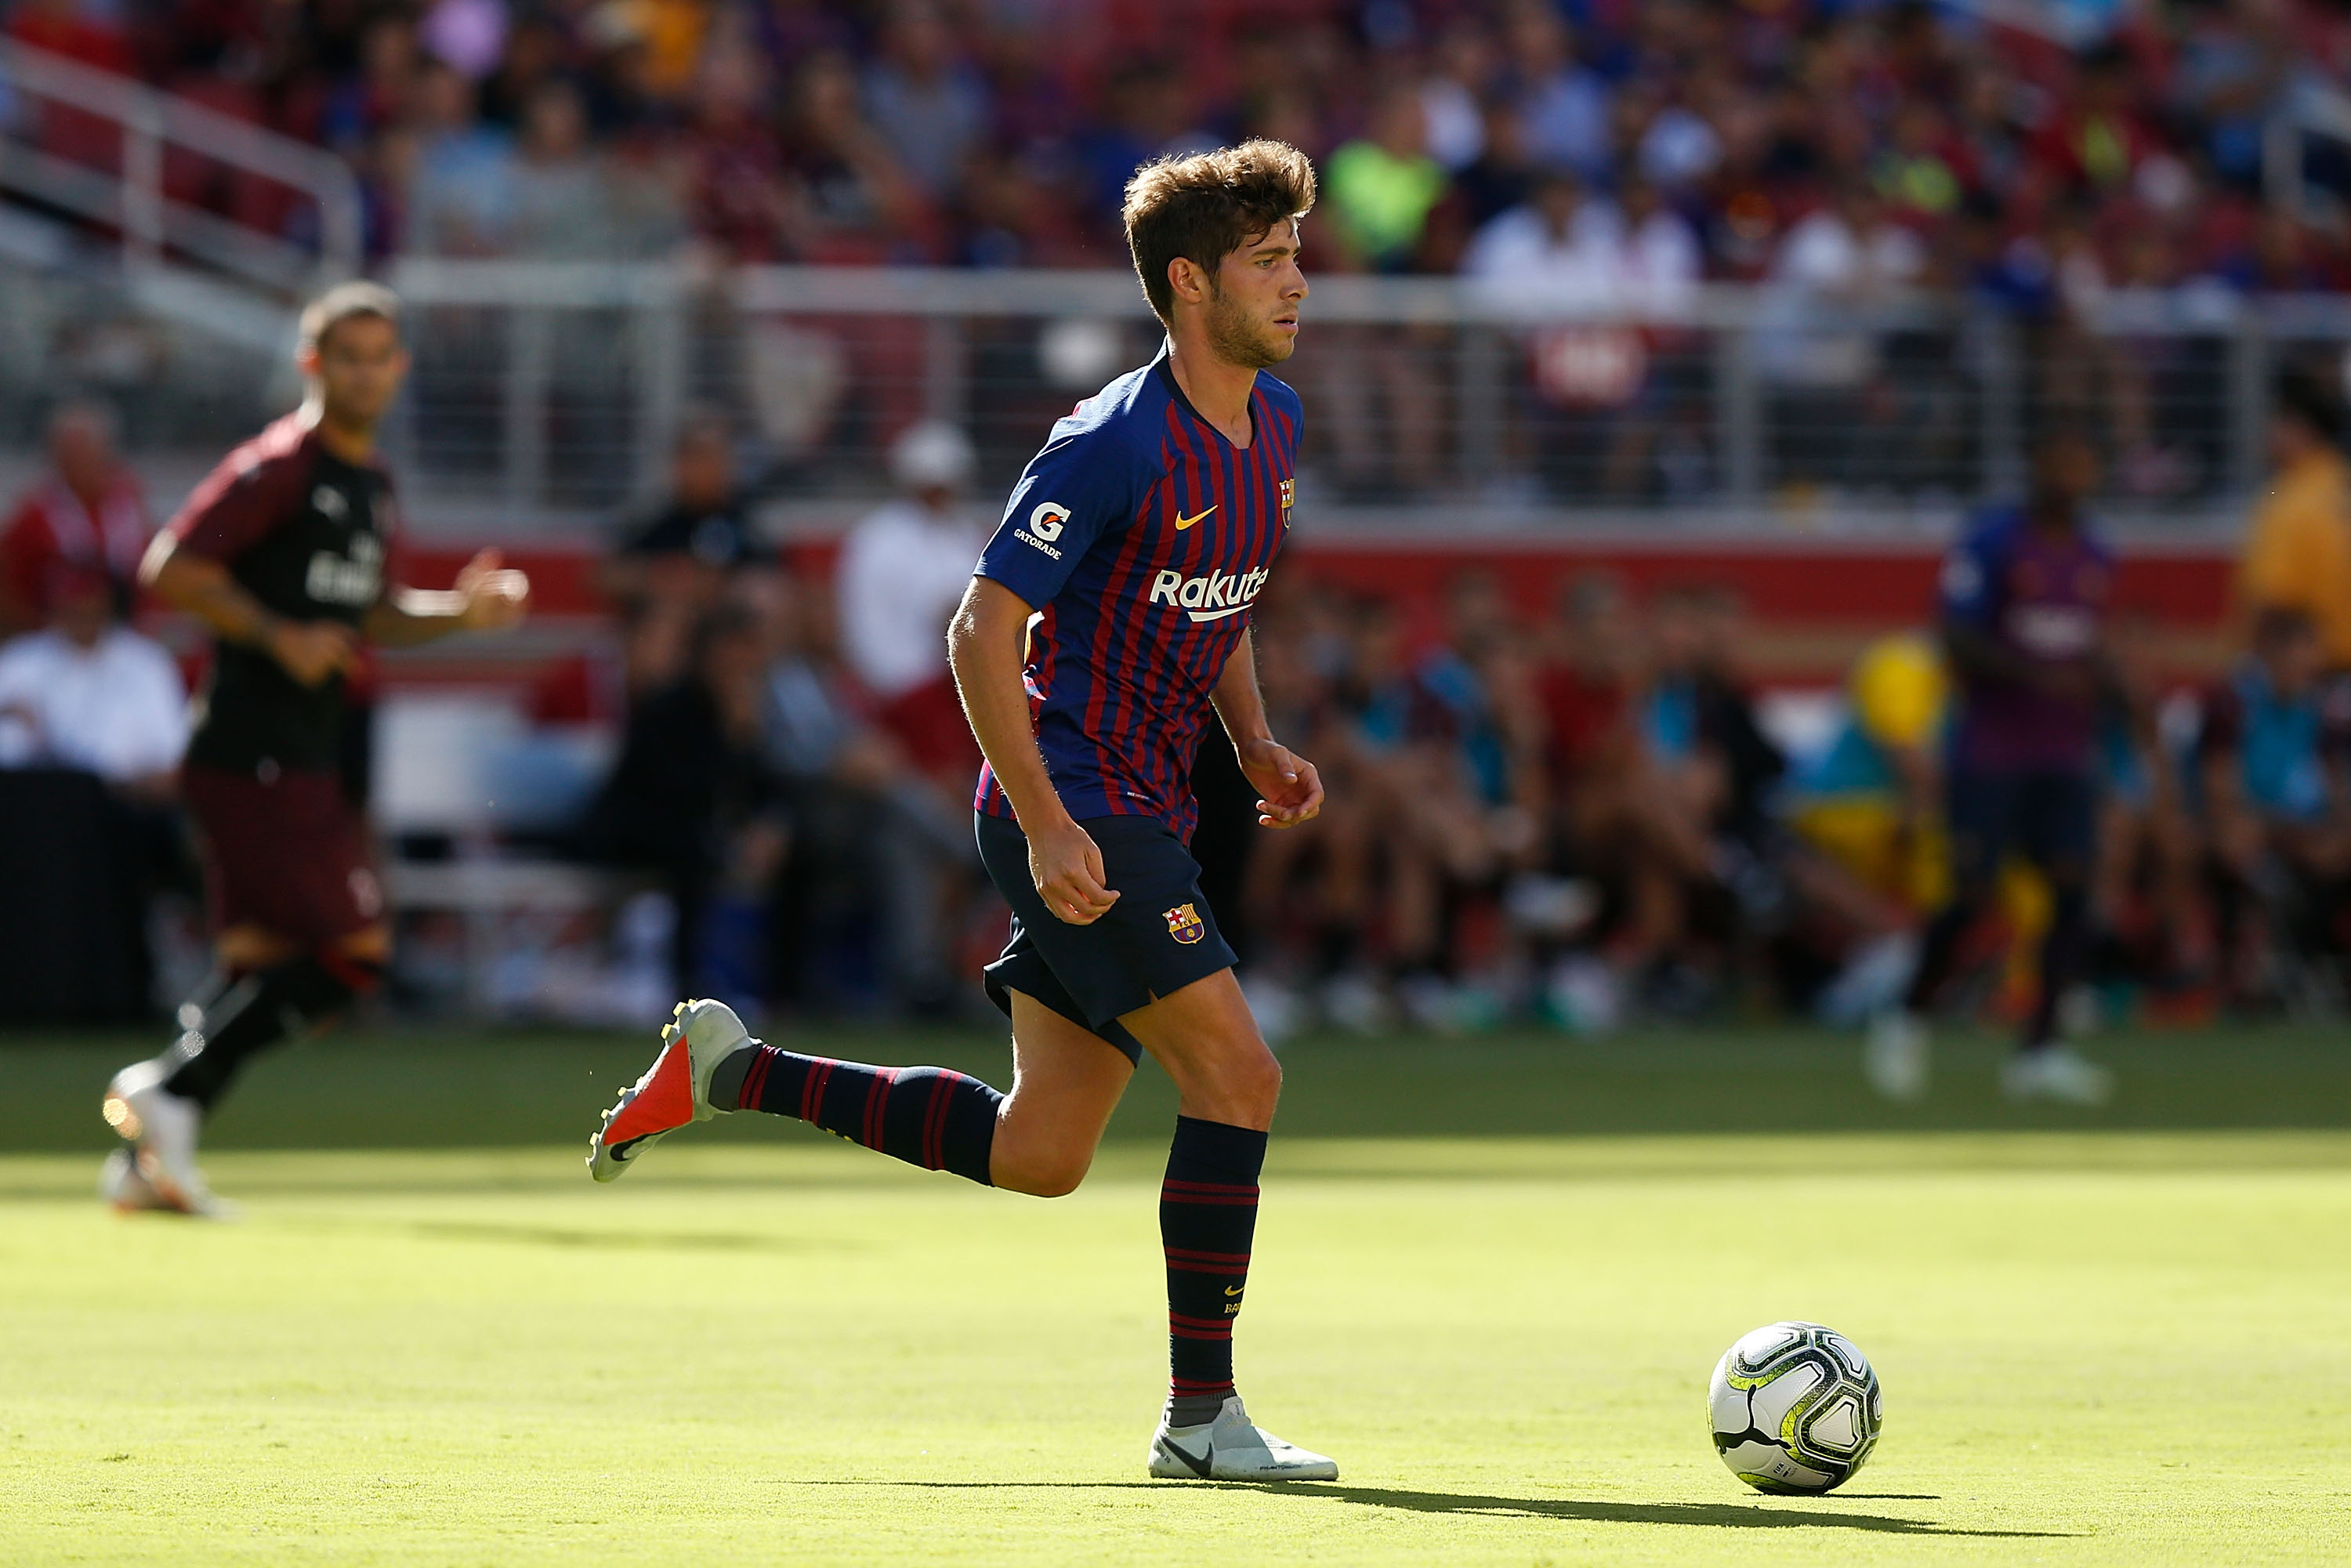 SANTA CLARA, CA - AUGUST 04: Sergi Roberto #20 of FC Barcelona controls the ball during the International Champions Cup match against AC Milan at Levi's Stadium on August 4, 2018 in Santa Clara, California. (Photo by Lachlan Cunningham/Getty Images)